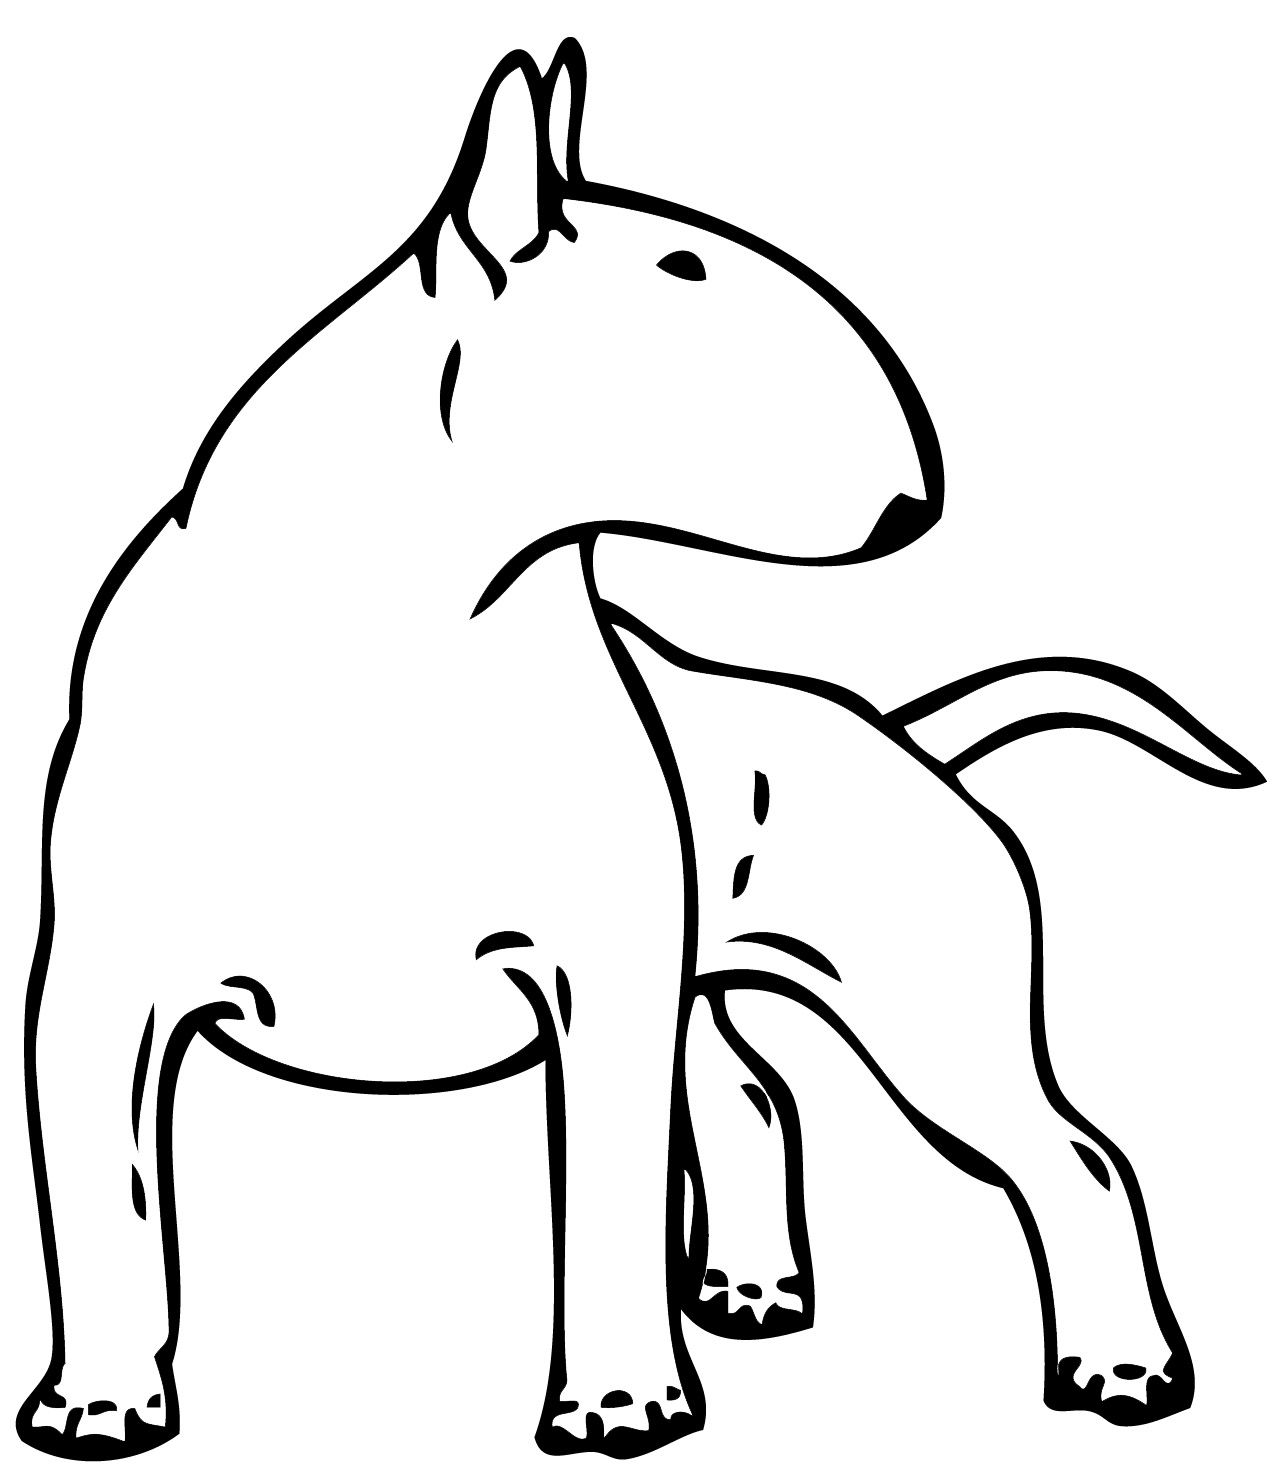 Stickers autocollant chien Bull terrier